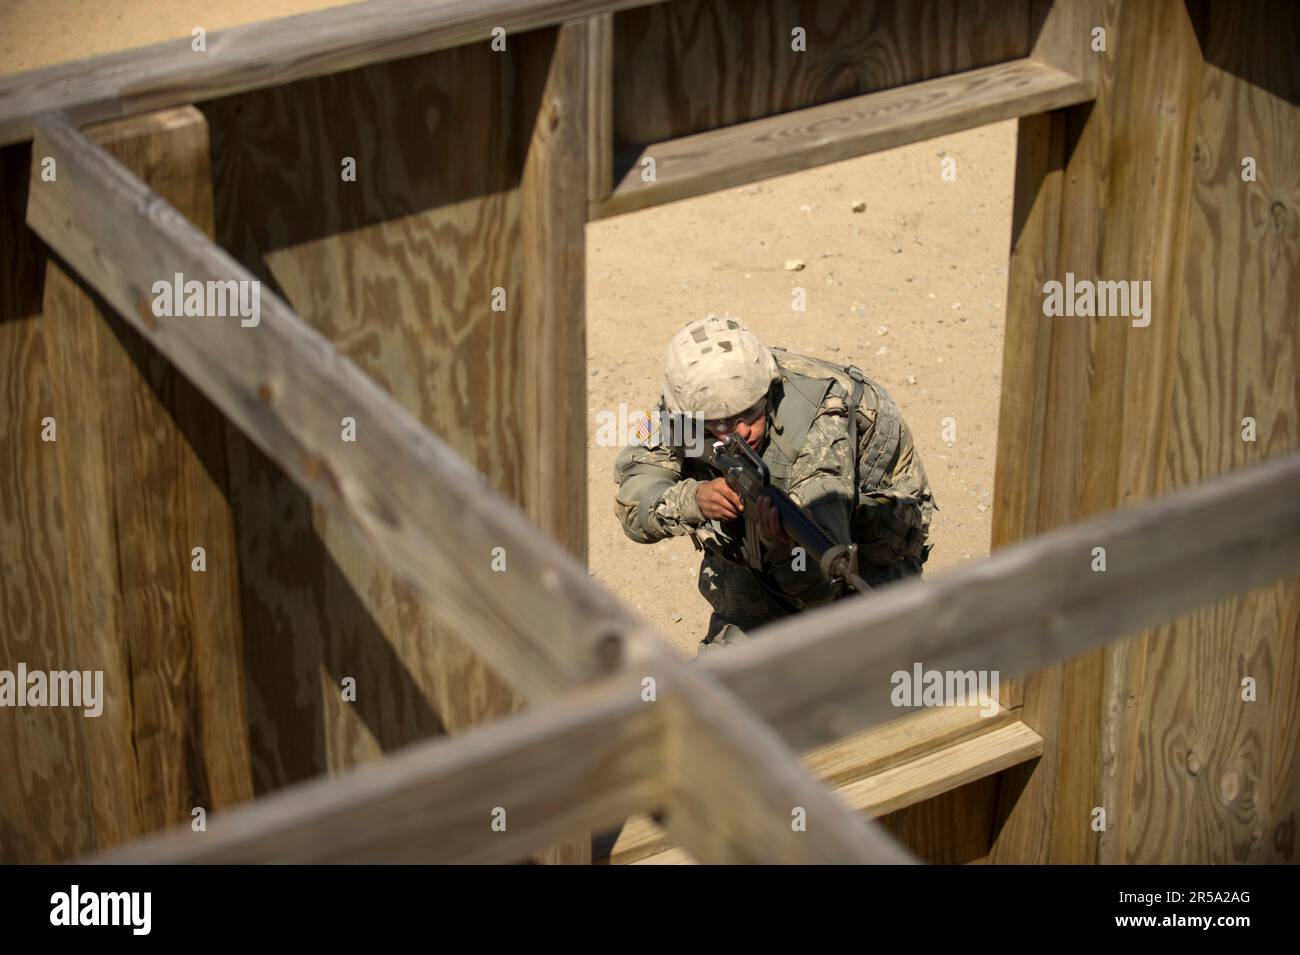 A soldier basic training moves tactically past a window during close quarters combat training. Stock Photo